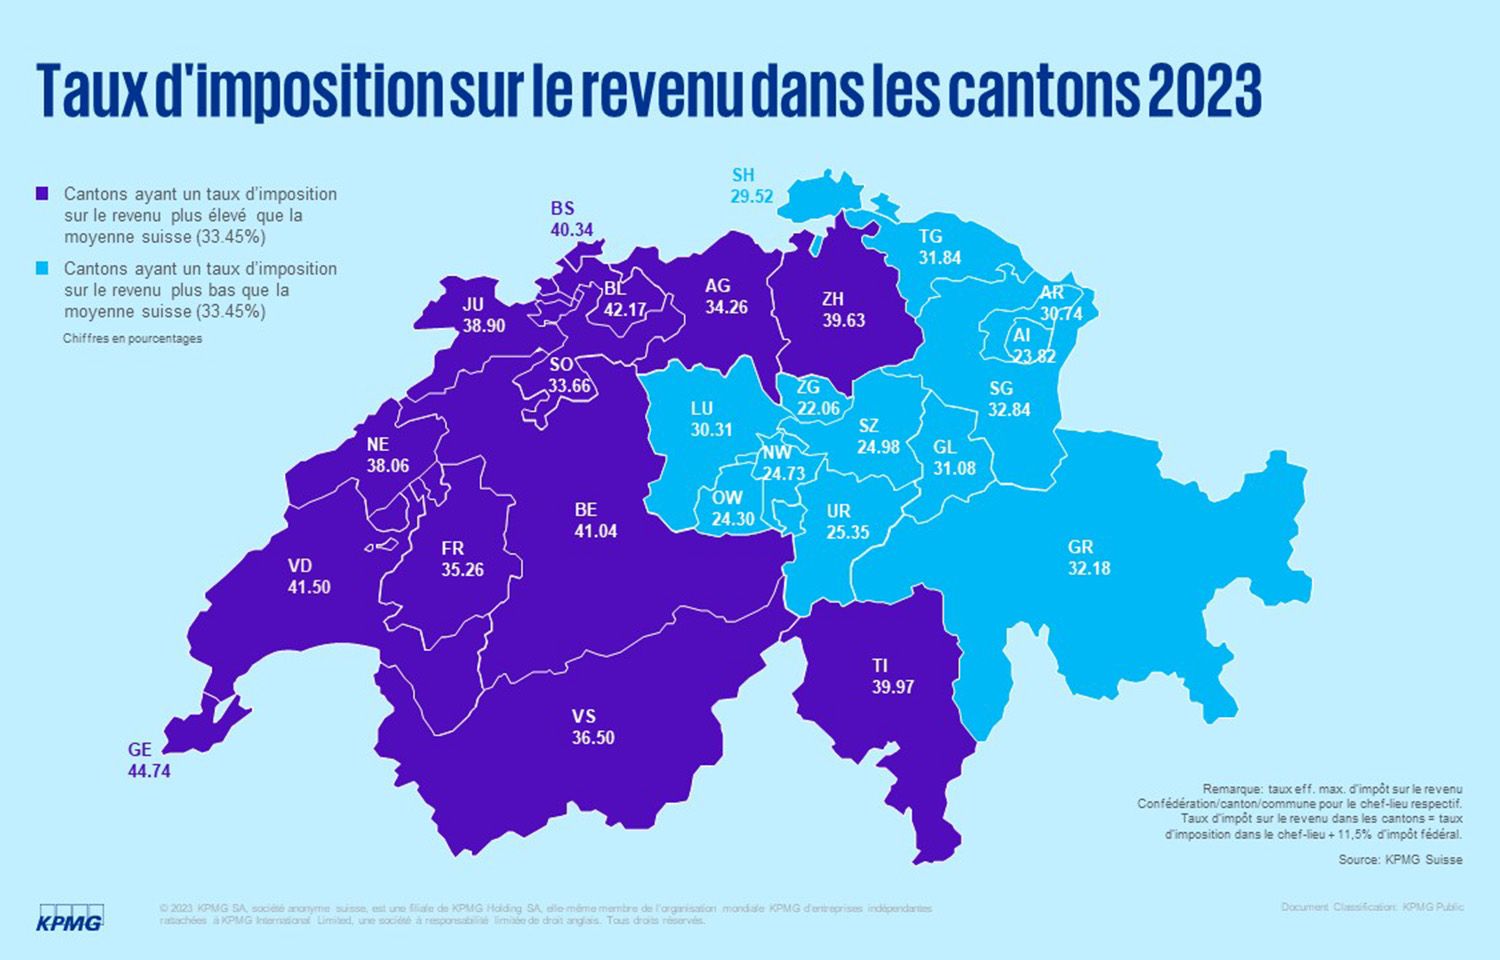 Income tax rates in the cantons in 2023